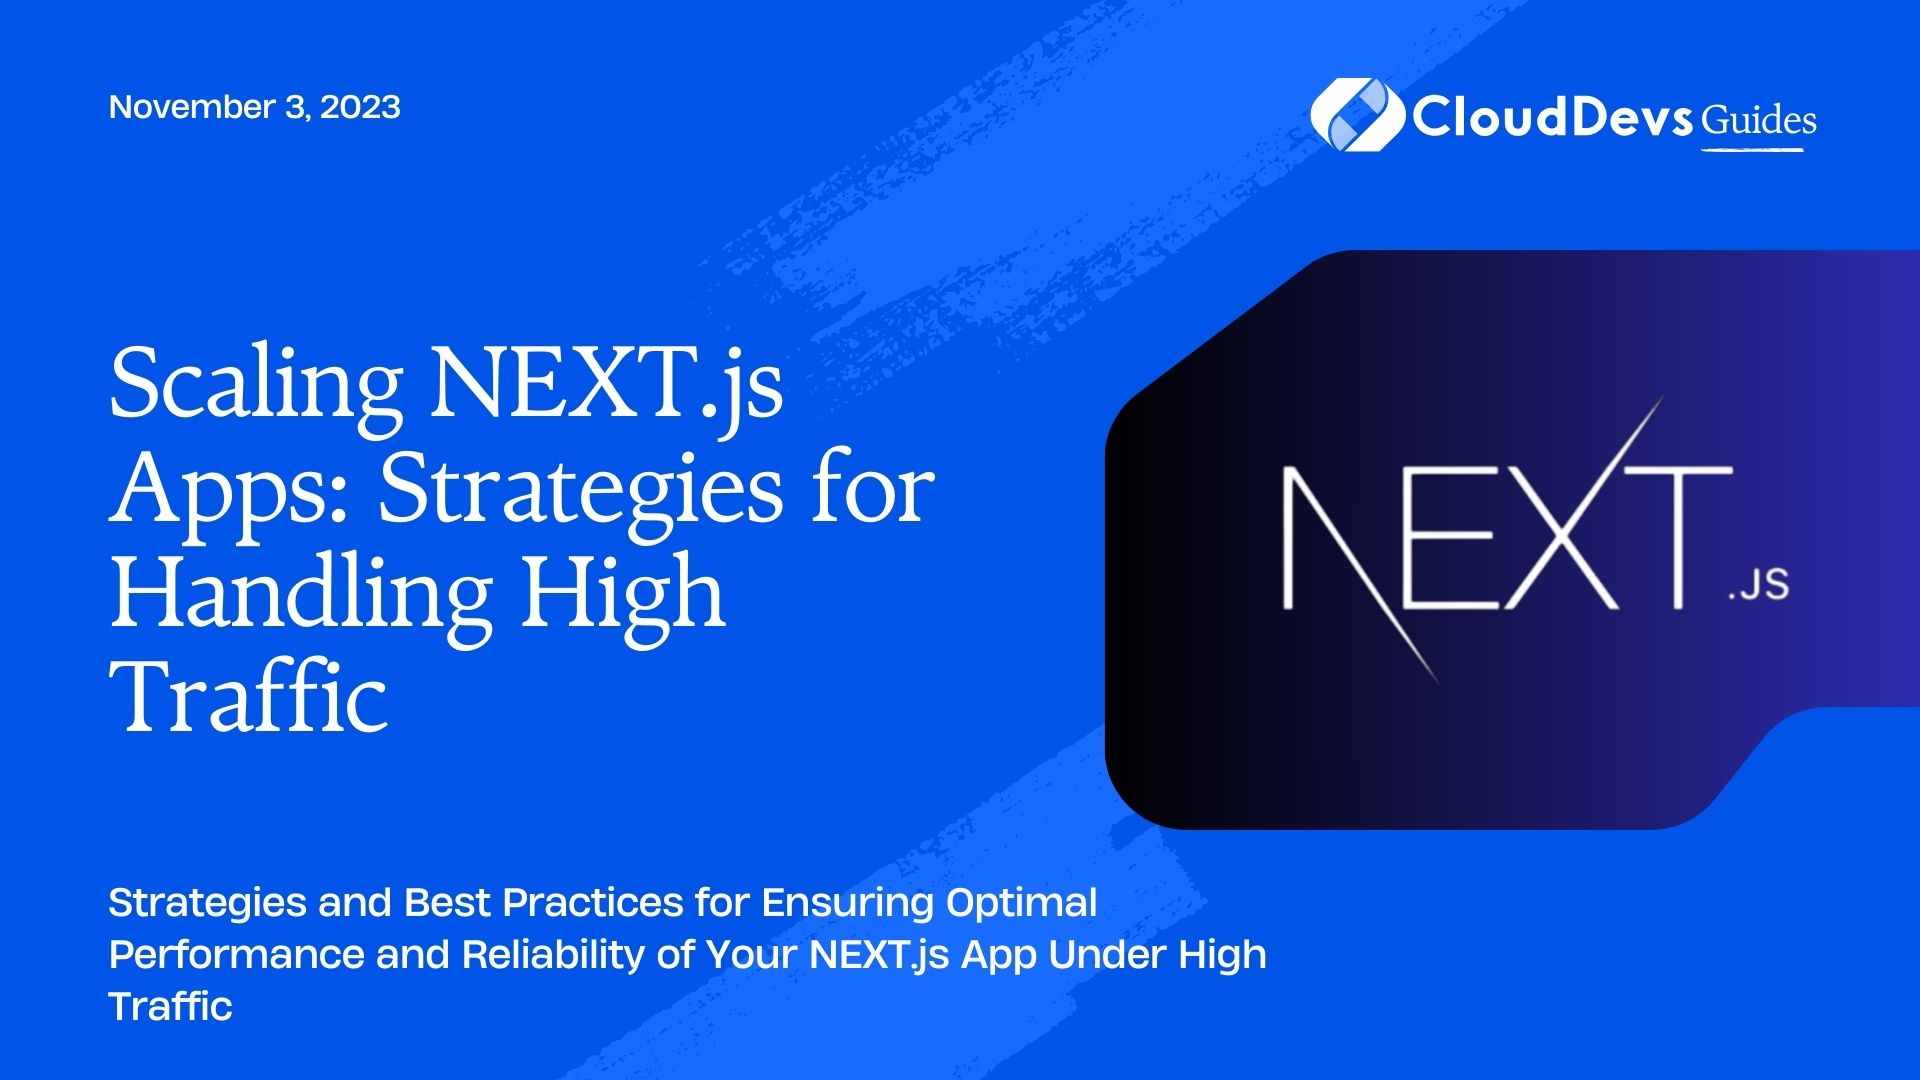 Scaling NEXT.js Apps: Strategies for Handling High Traffic